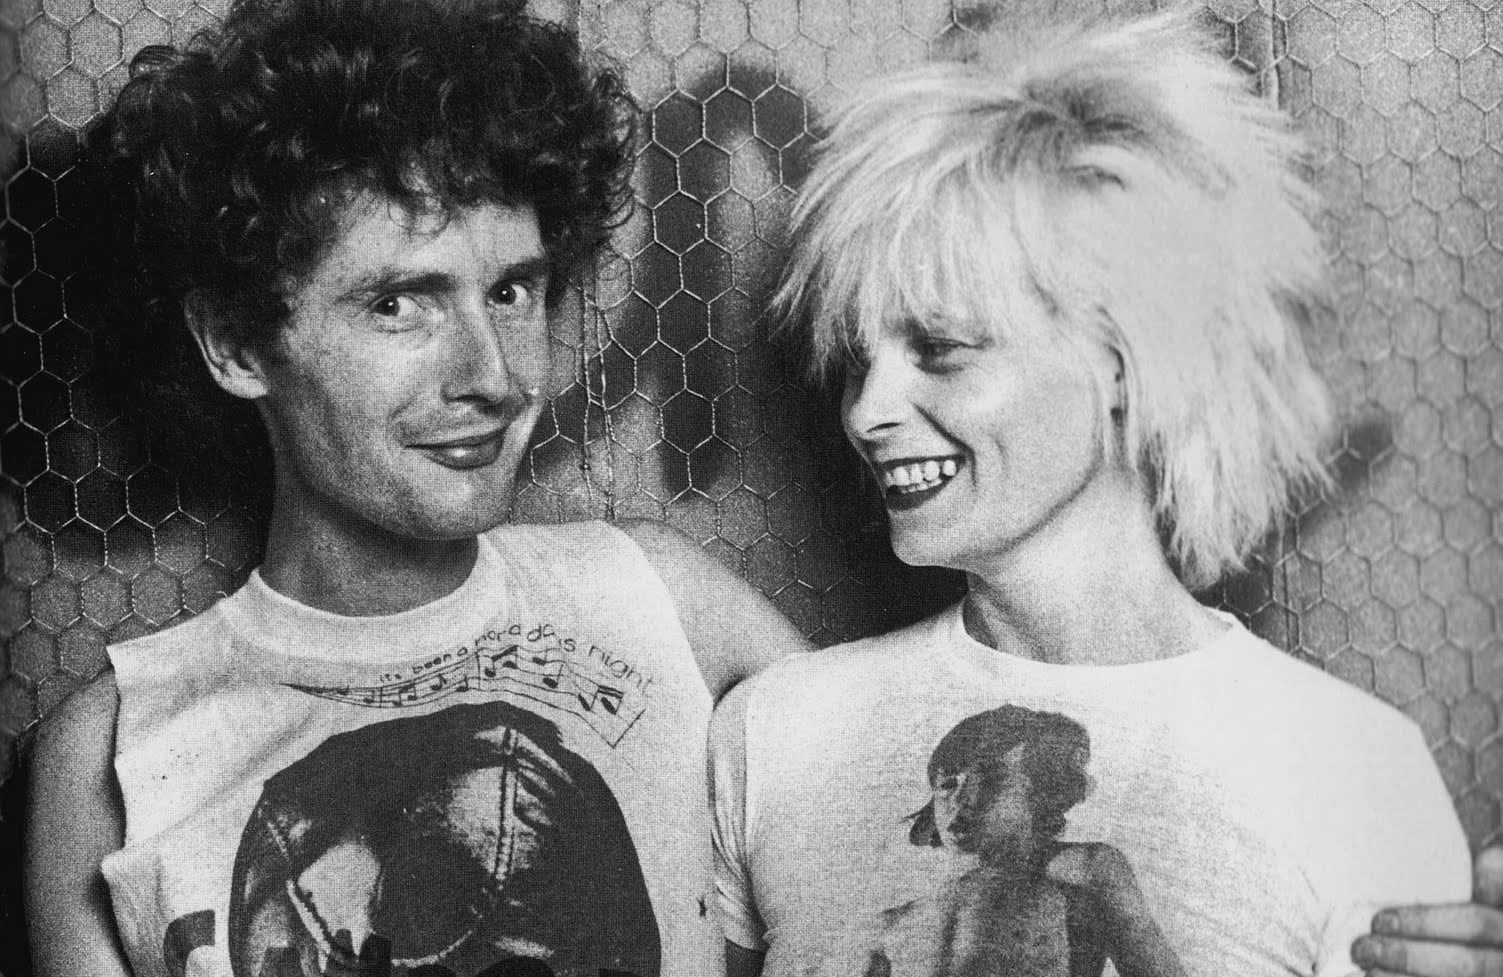 Malcolm McLaren and Vivienne Westwood in 1976